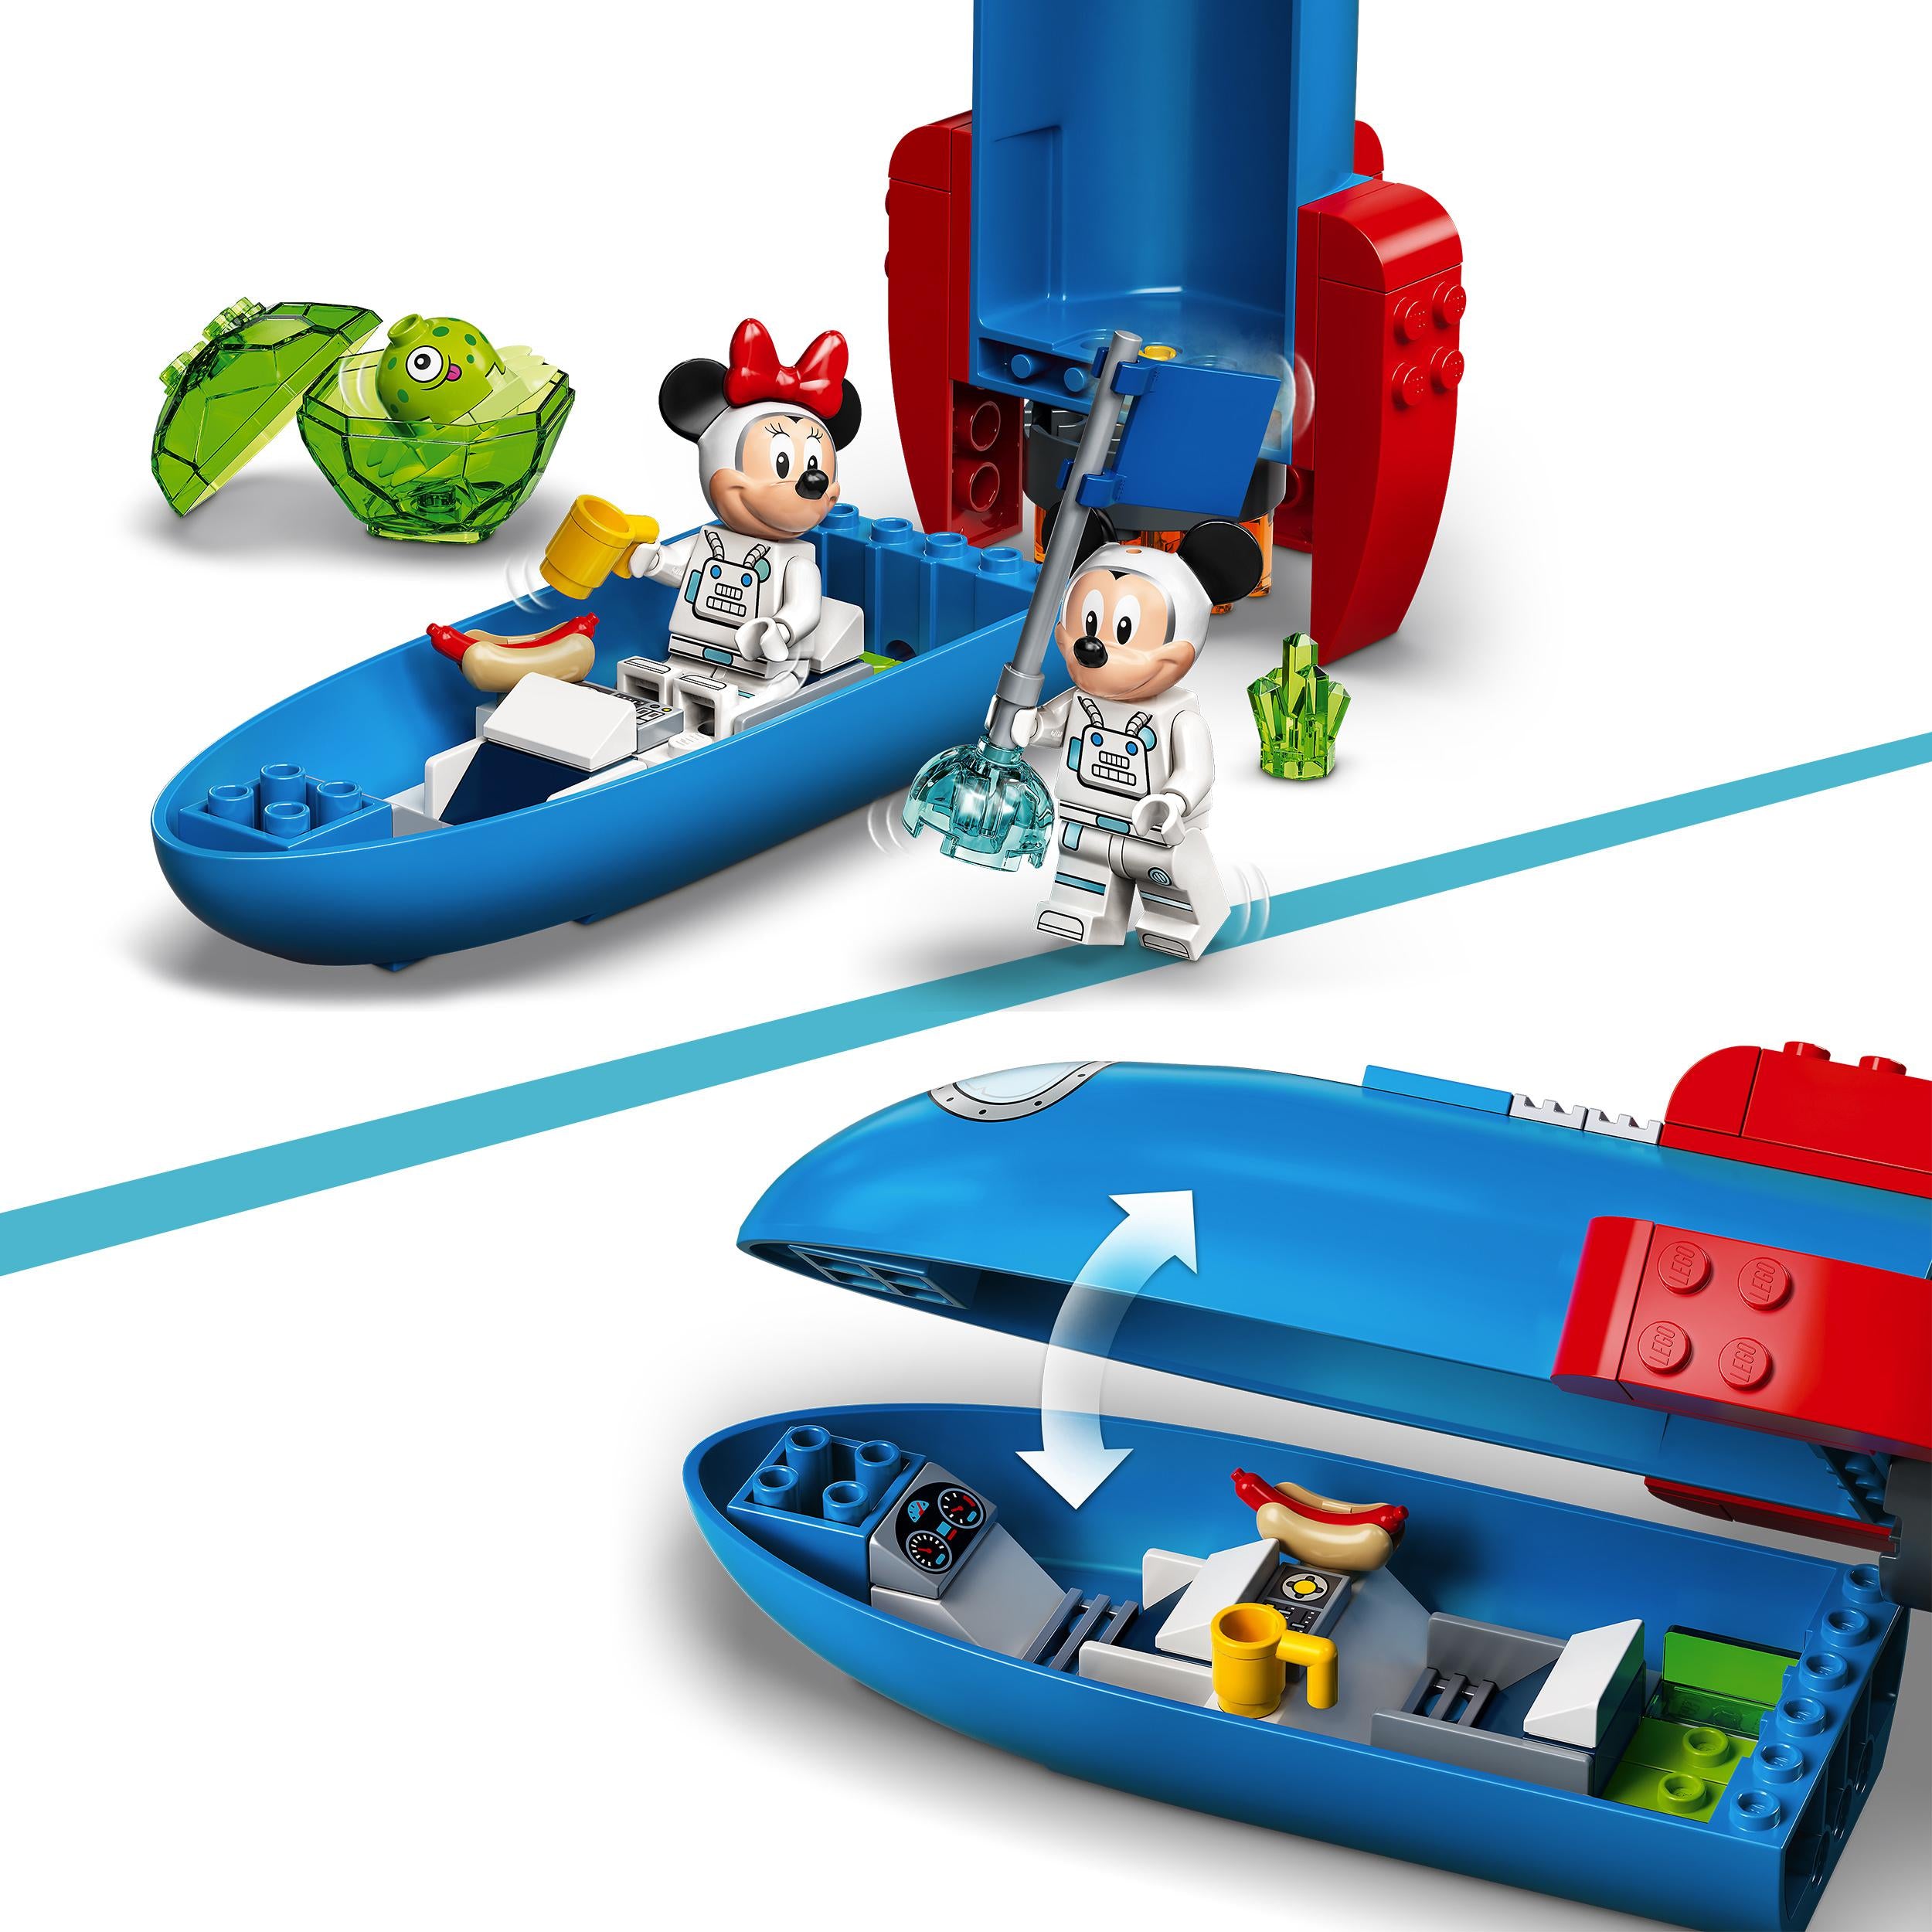 LEGO Disney: Mickey Mouse & Minnie Mouse's Space Rocket - Snickelfritz Toys